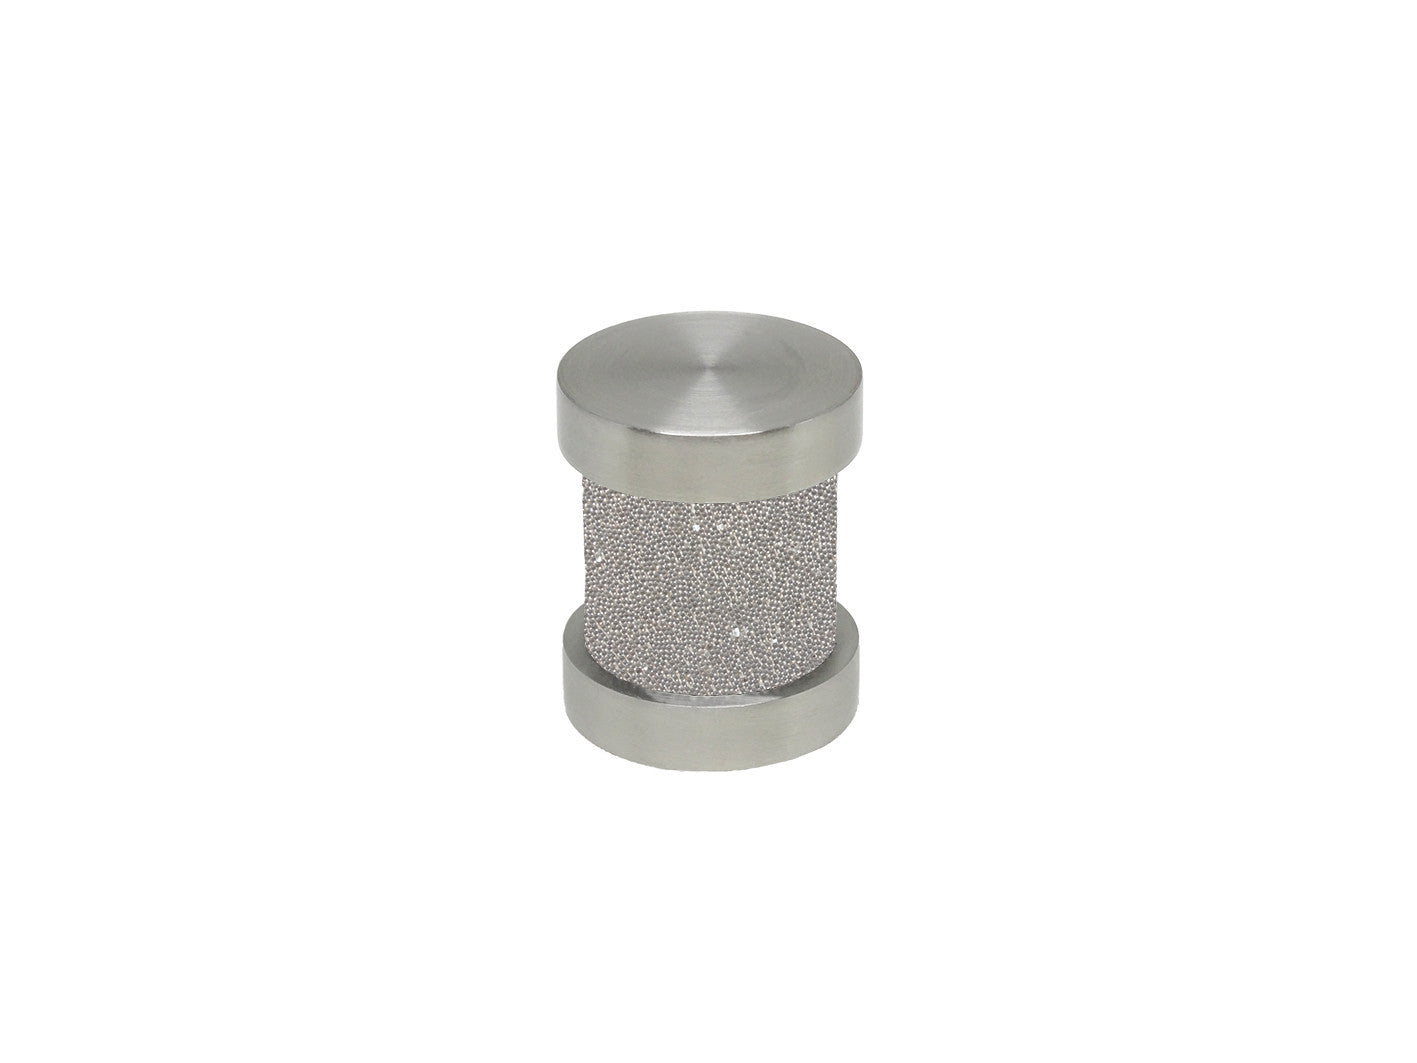 Champagne cream groove finial | Walcot House 30mm stainless steel collection